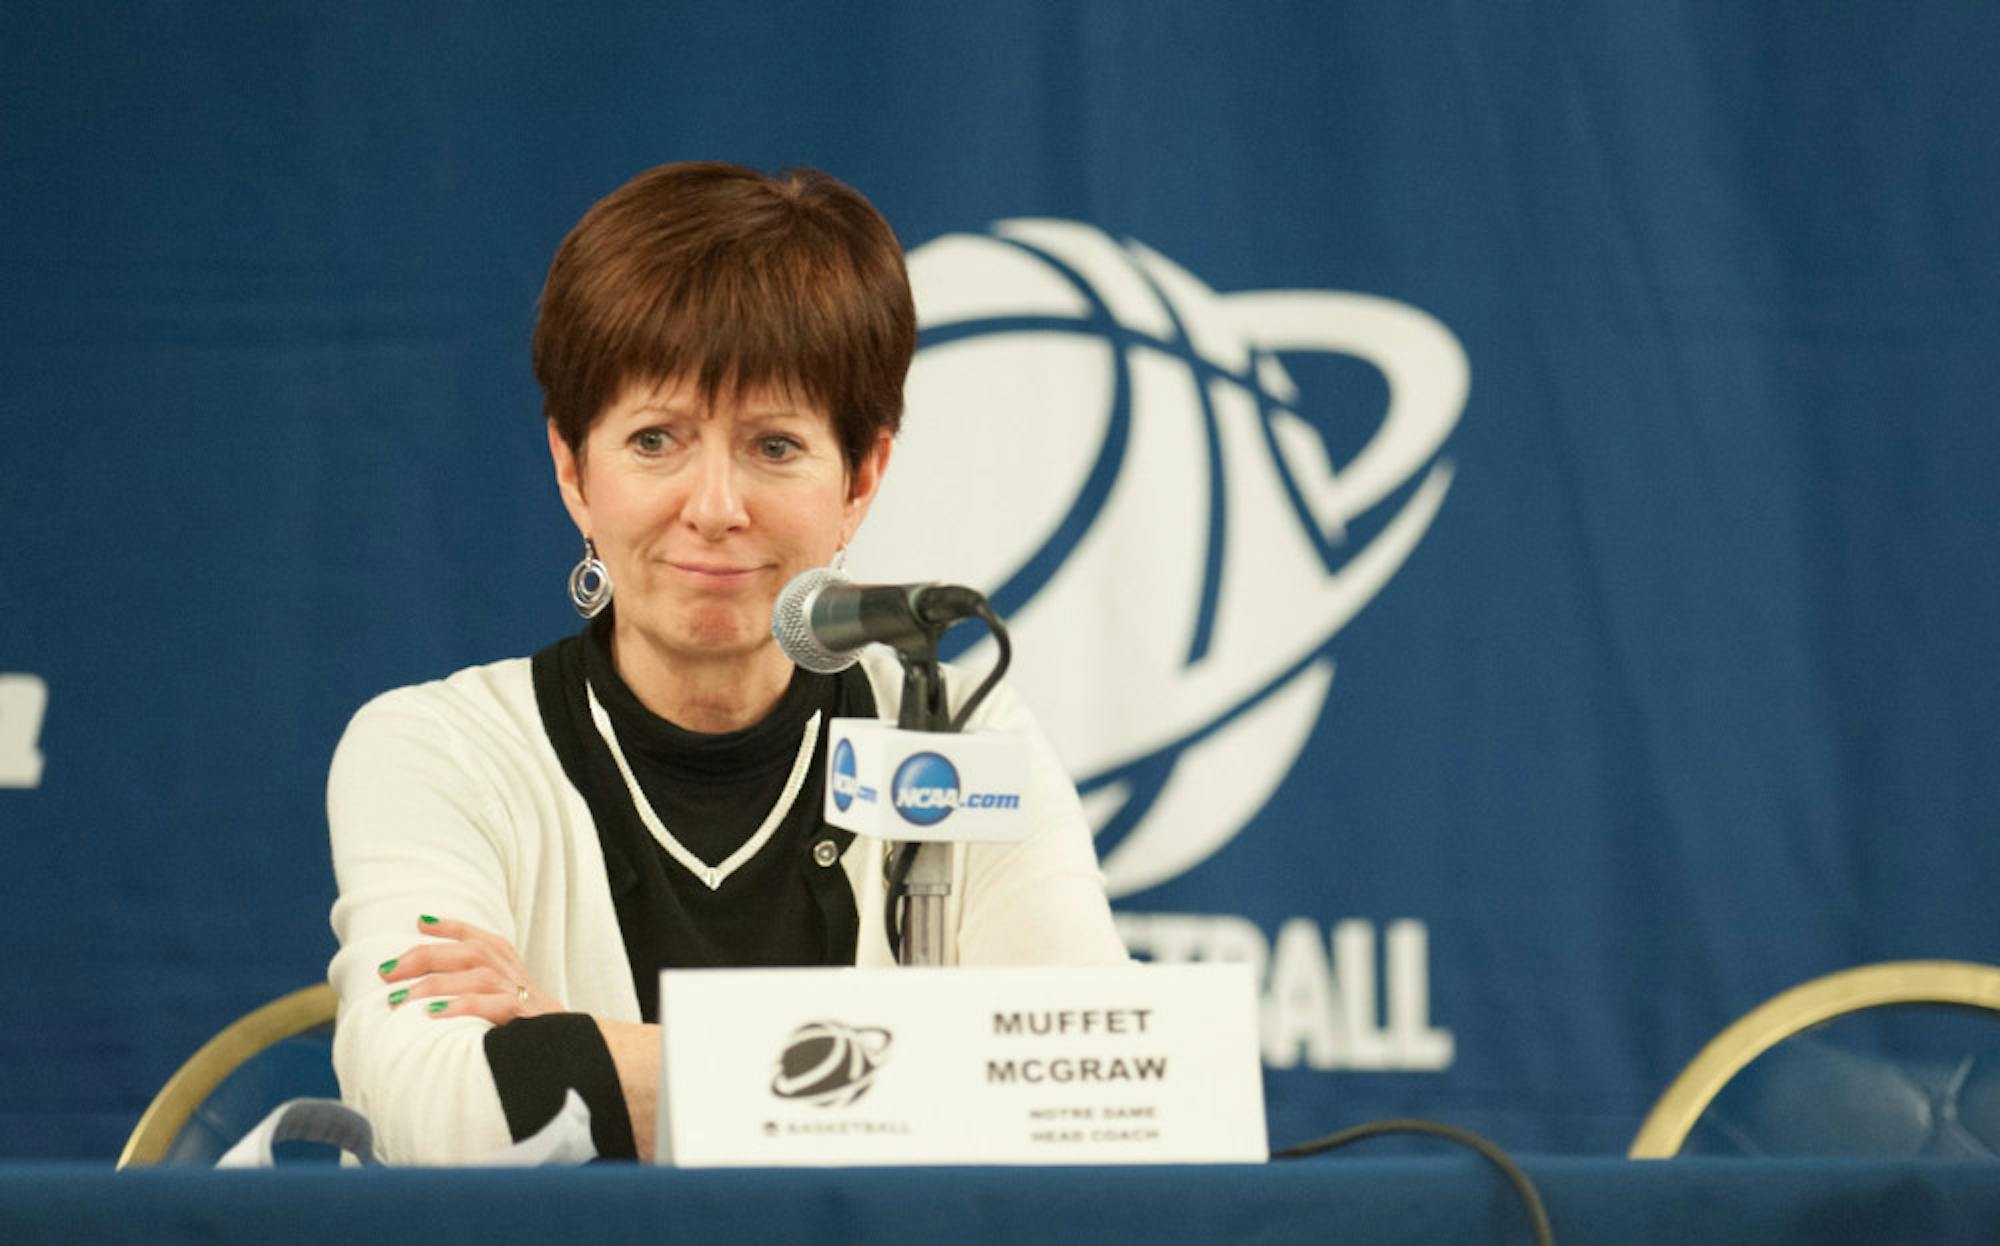 Muffet McGraw smirks during her post-game press conference after Notre Dame defeated Montana 77-43 in the first round of the NCAA tournament at Purcell Pavilion on March 20, 2015.